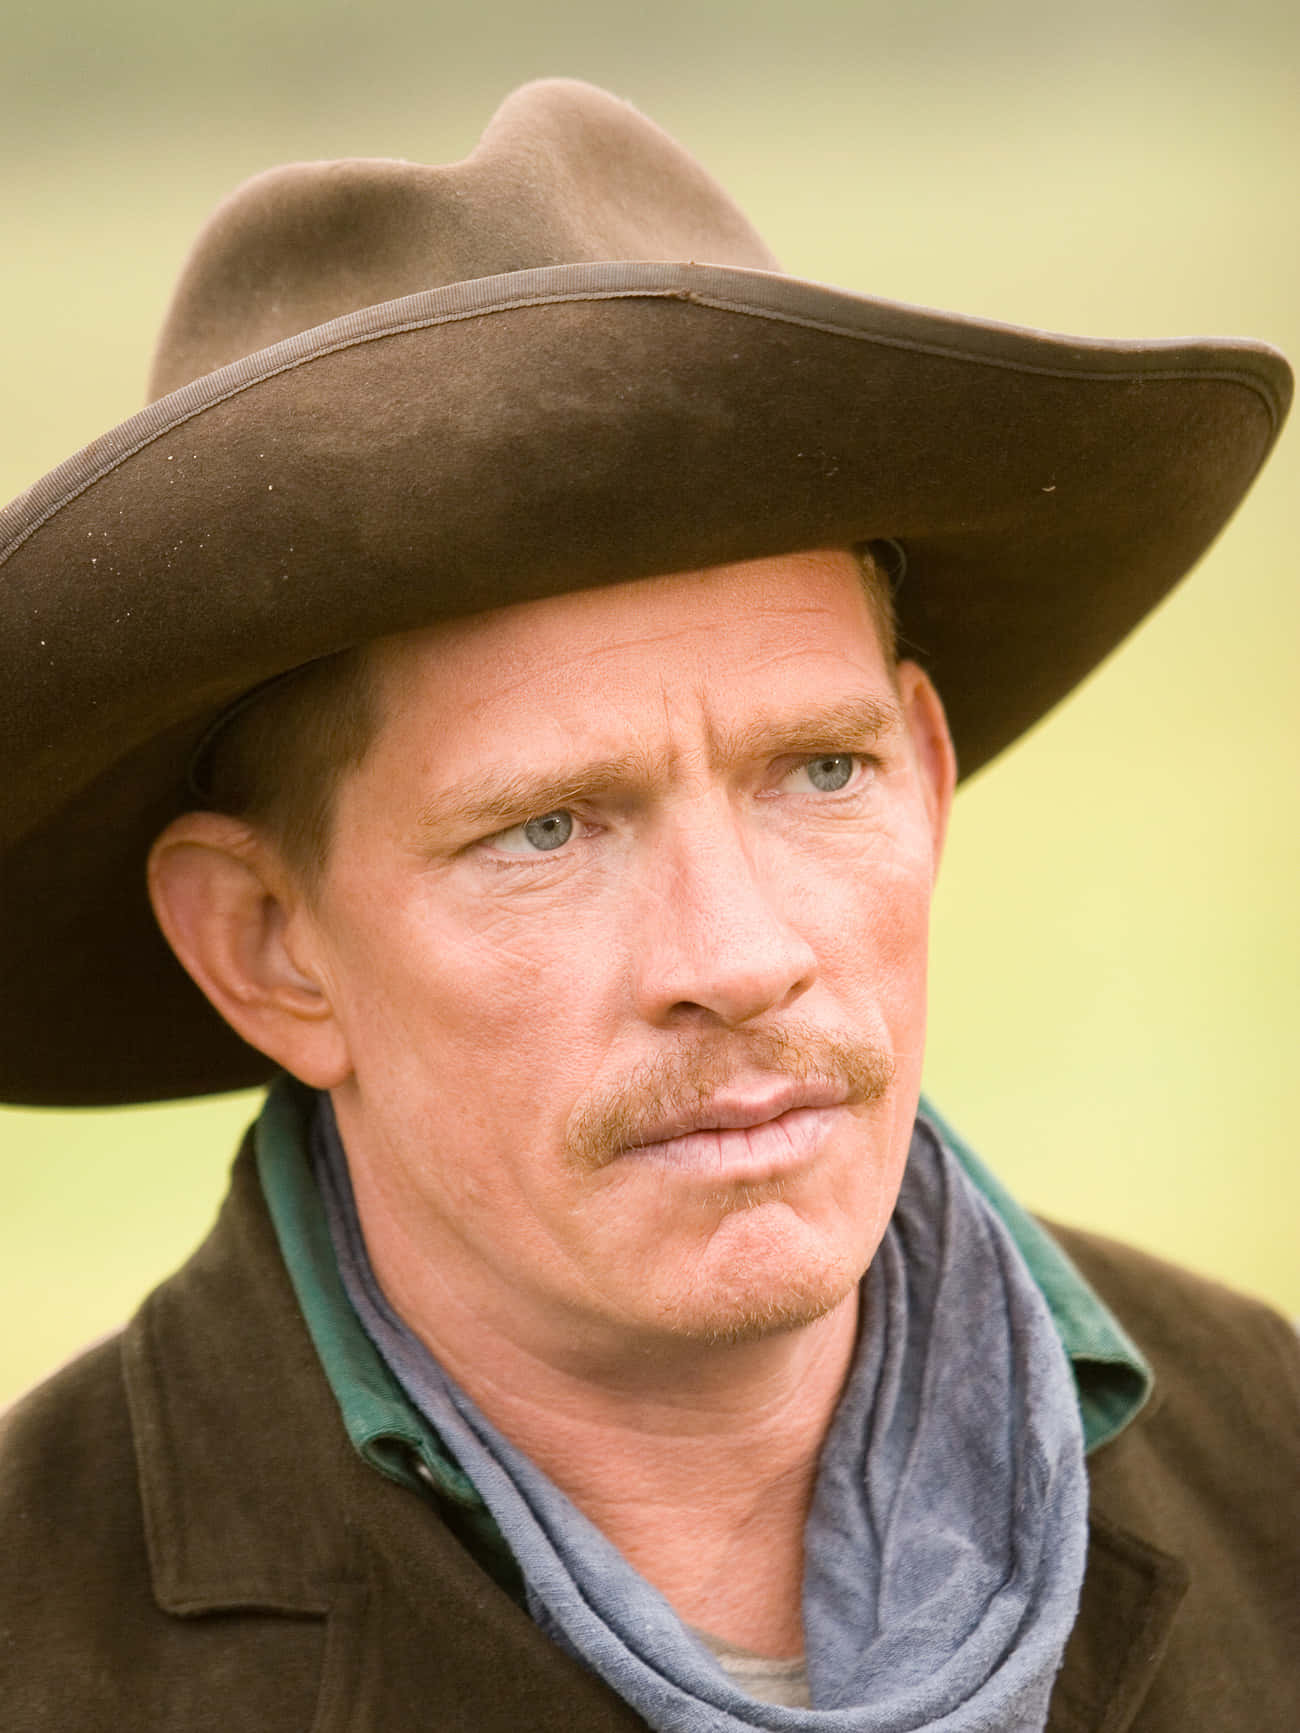 Actorthomas Haden Church, Also Known As Thomas Richard Mcmillen, Is An American Actor And Film Producer. He Is Best Known For His Role As Lowell Mather In The Television Series 